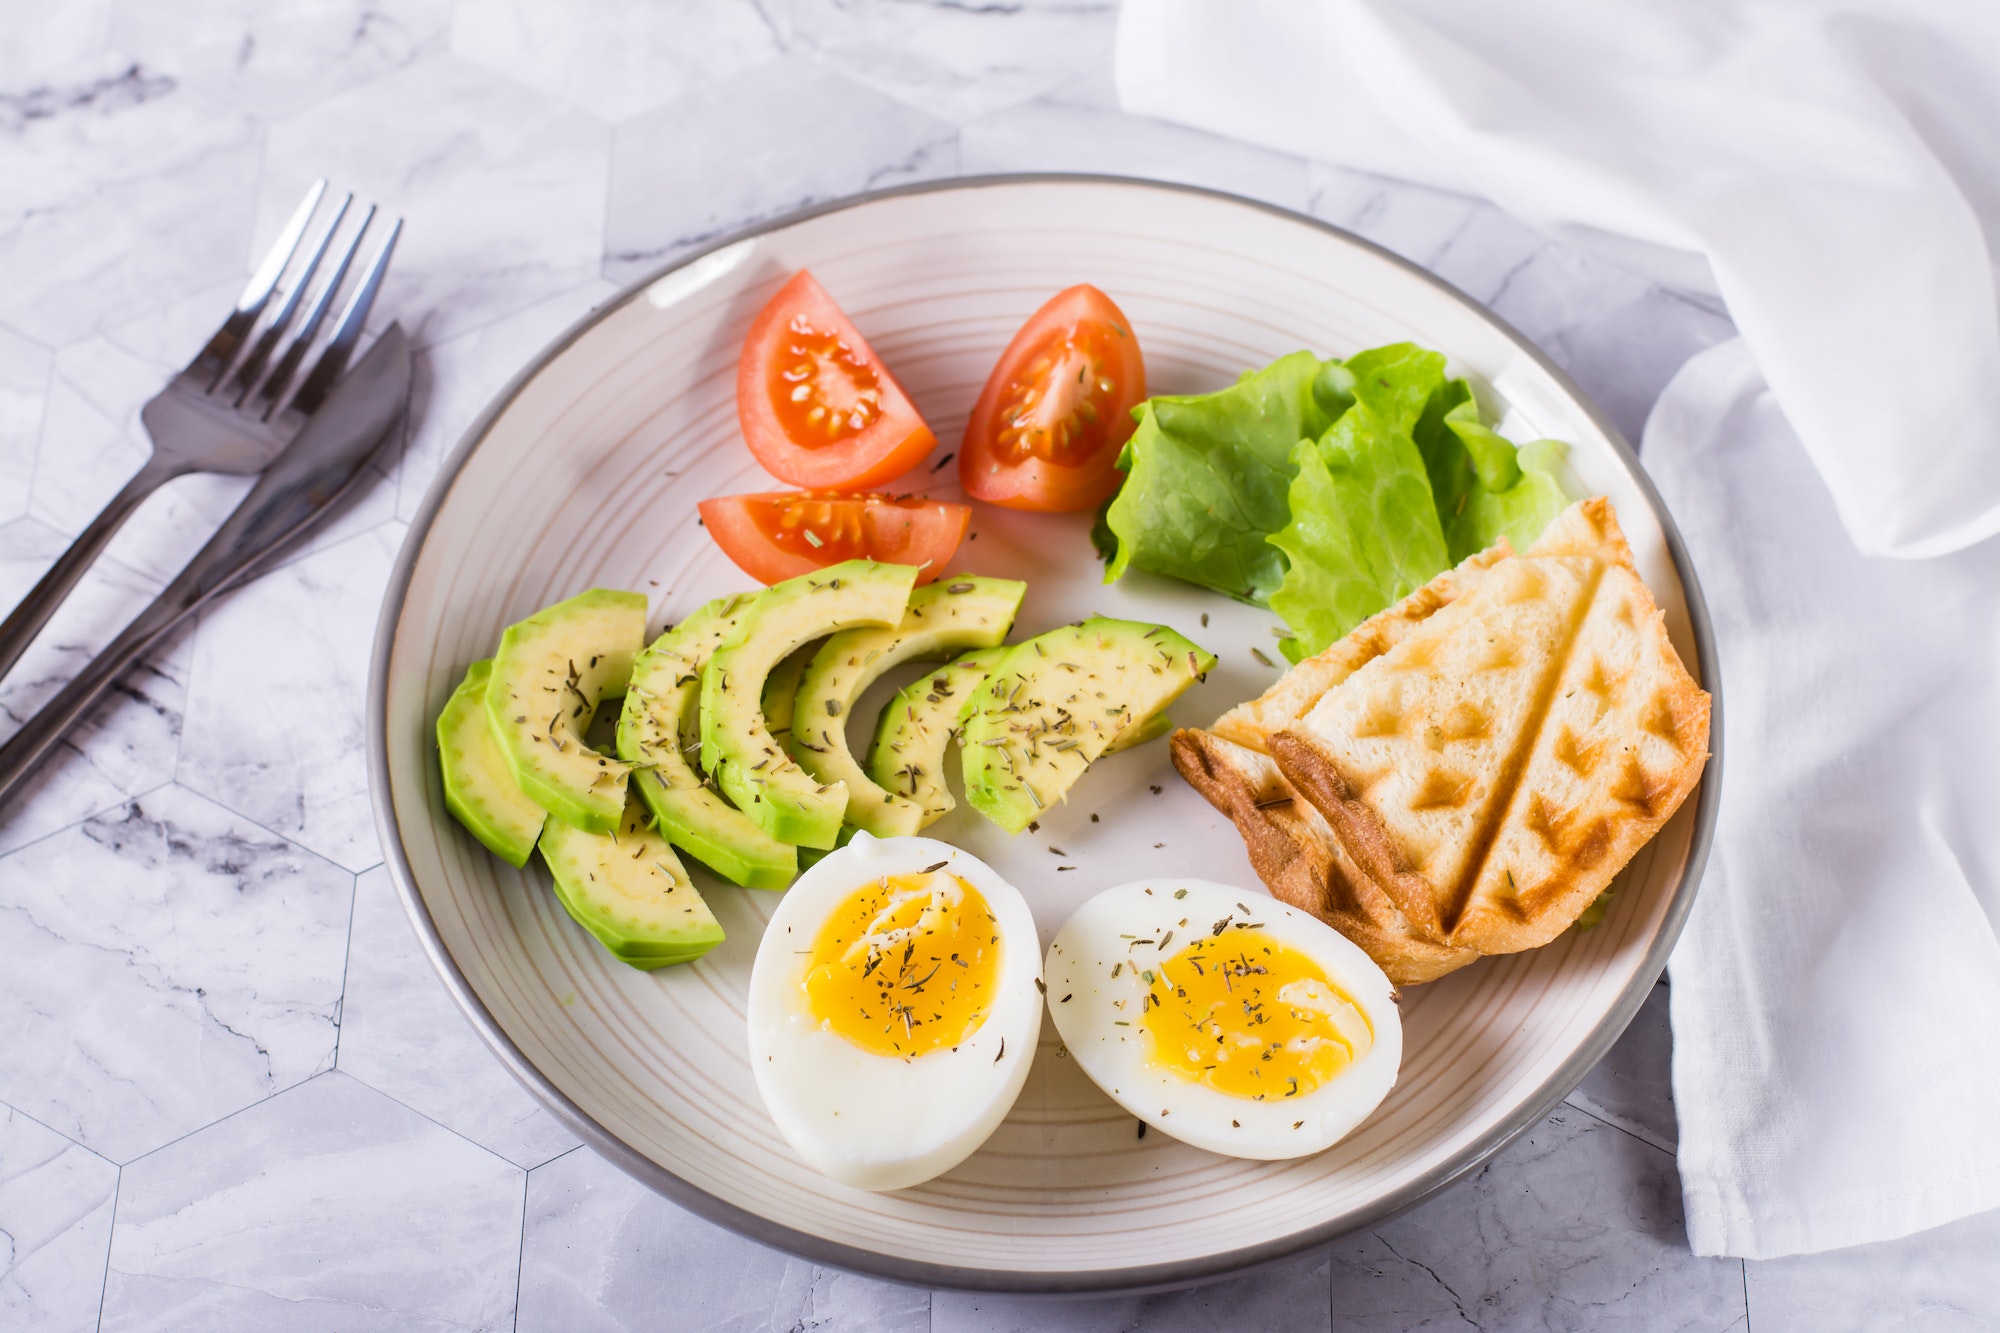 Avocado, soft boiled egg, tomatoes, lettuce and toast on a plate. Healthy food.